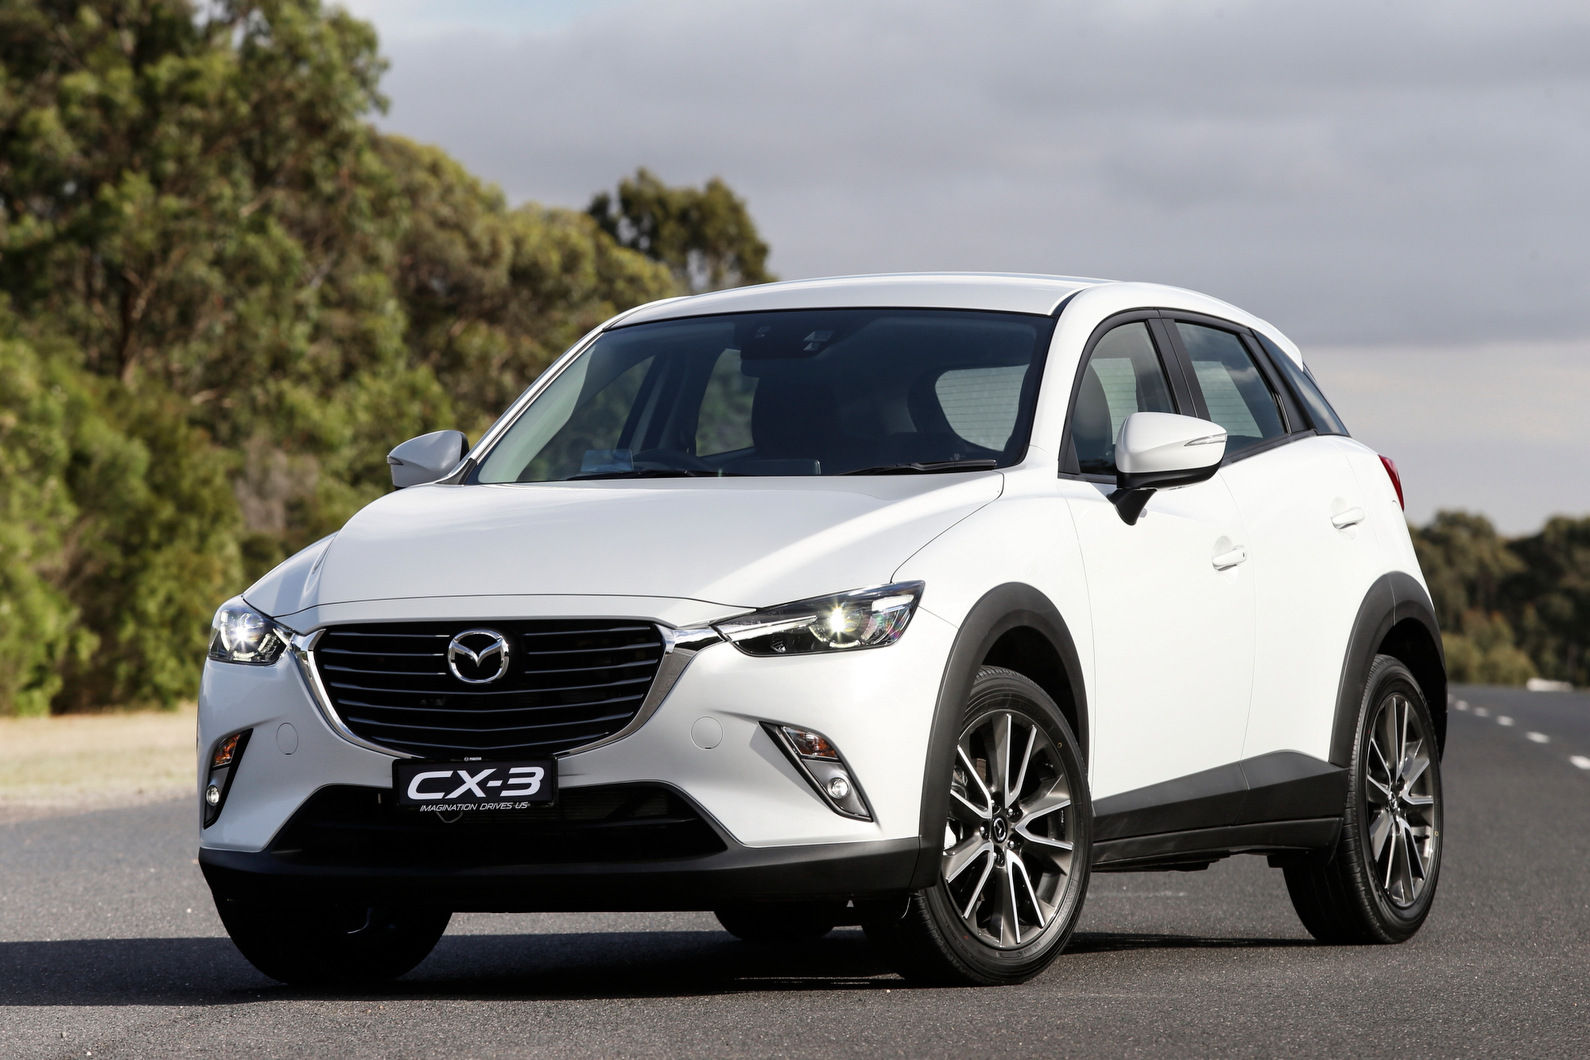 Mazda CX-3 to be Manufactured in Thailand to meet high demand